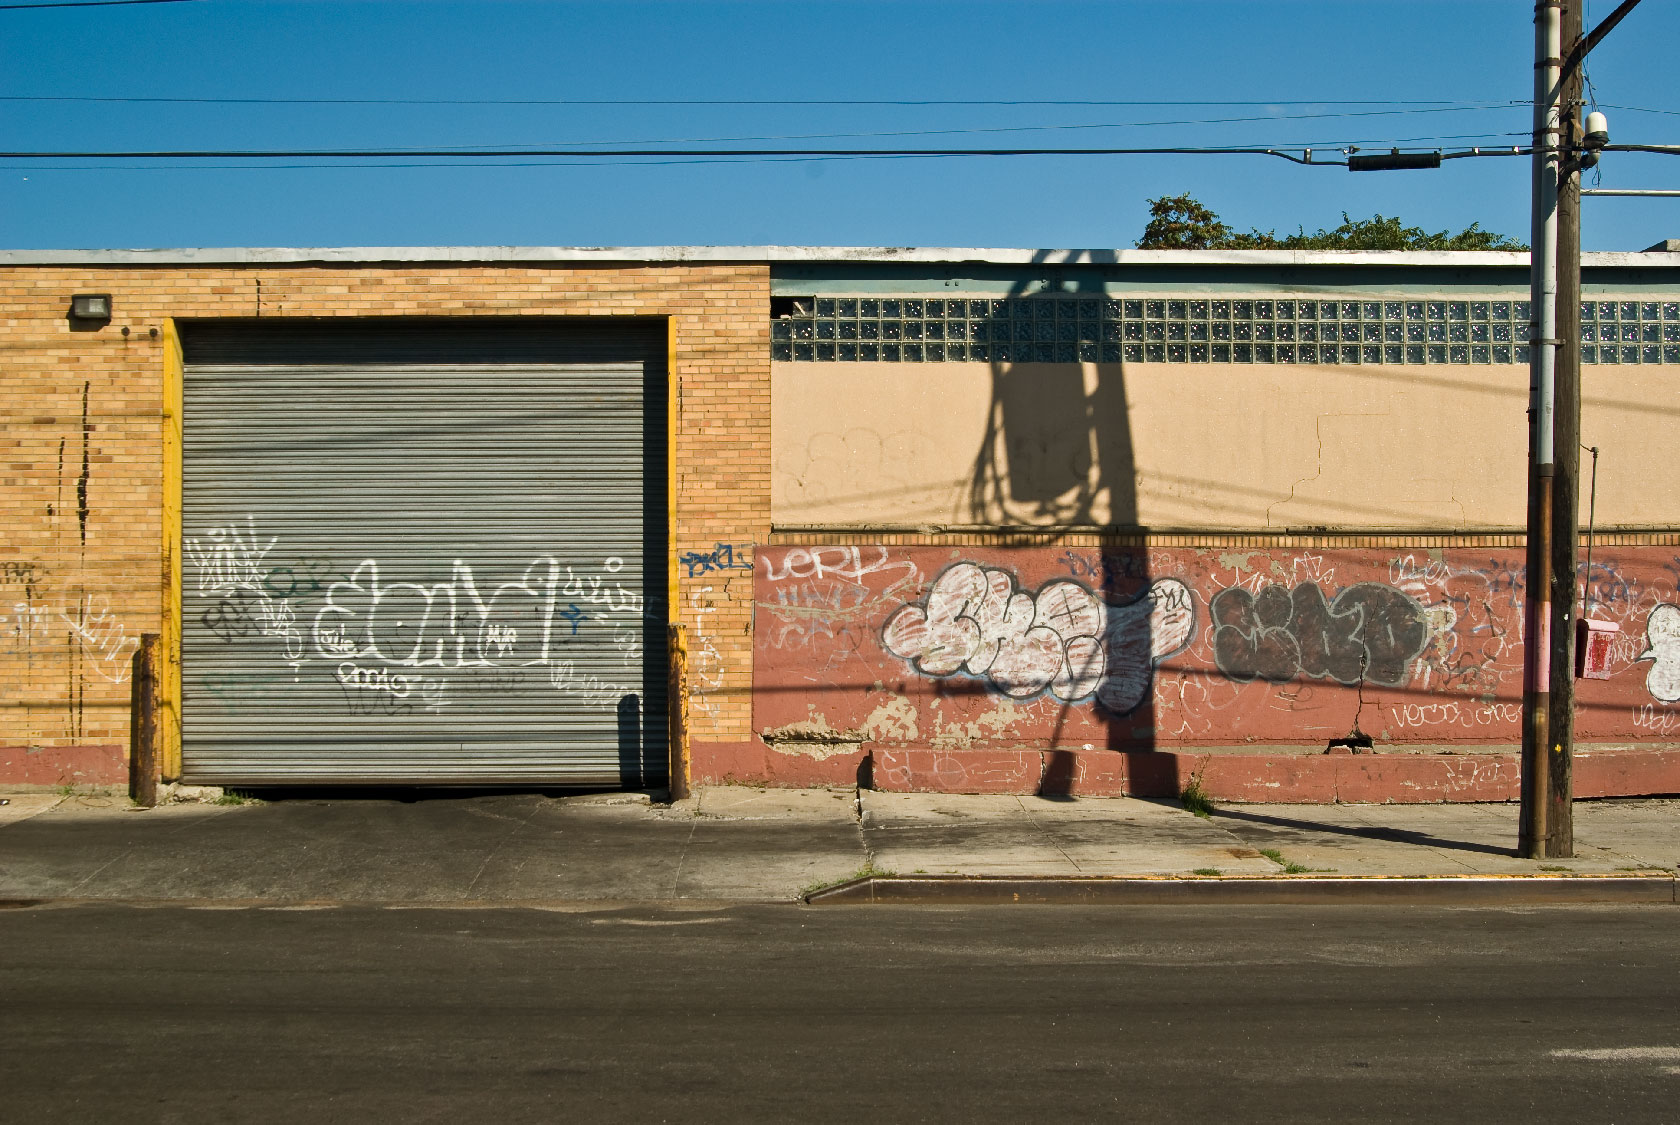 an image of a street view with some graffiti